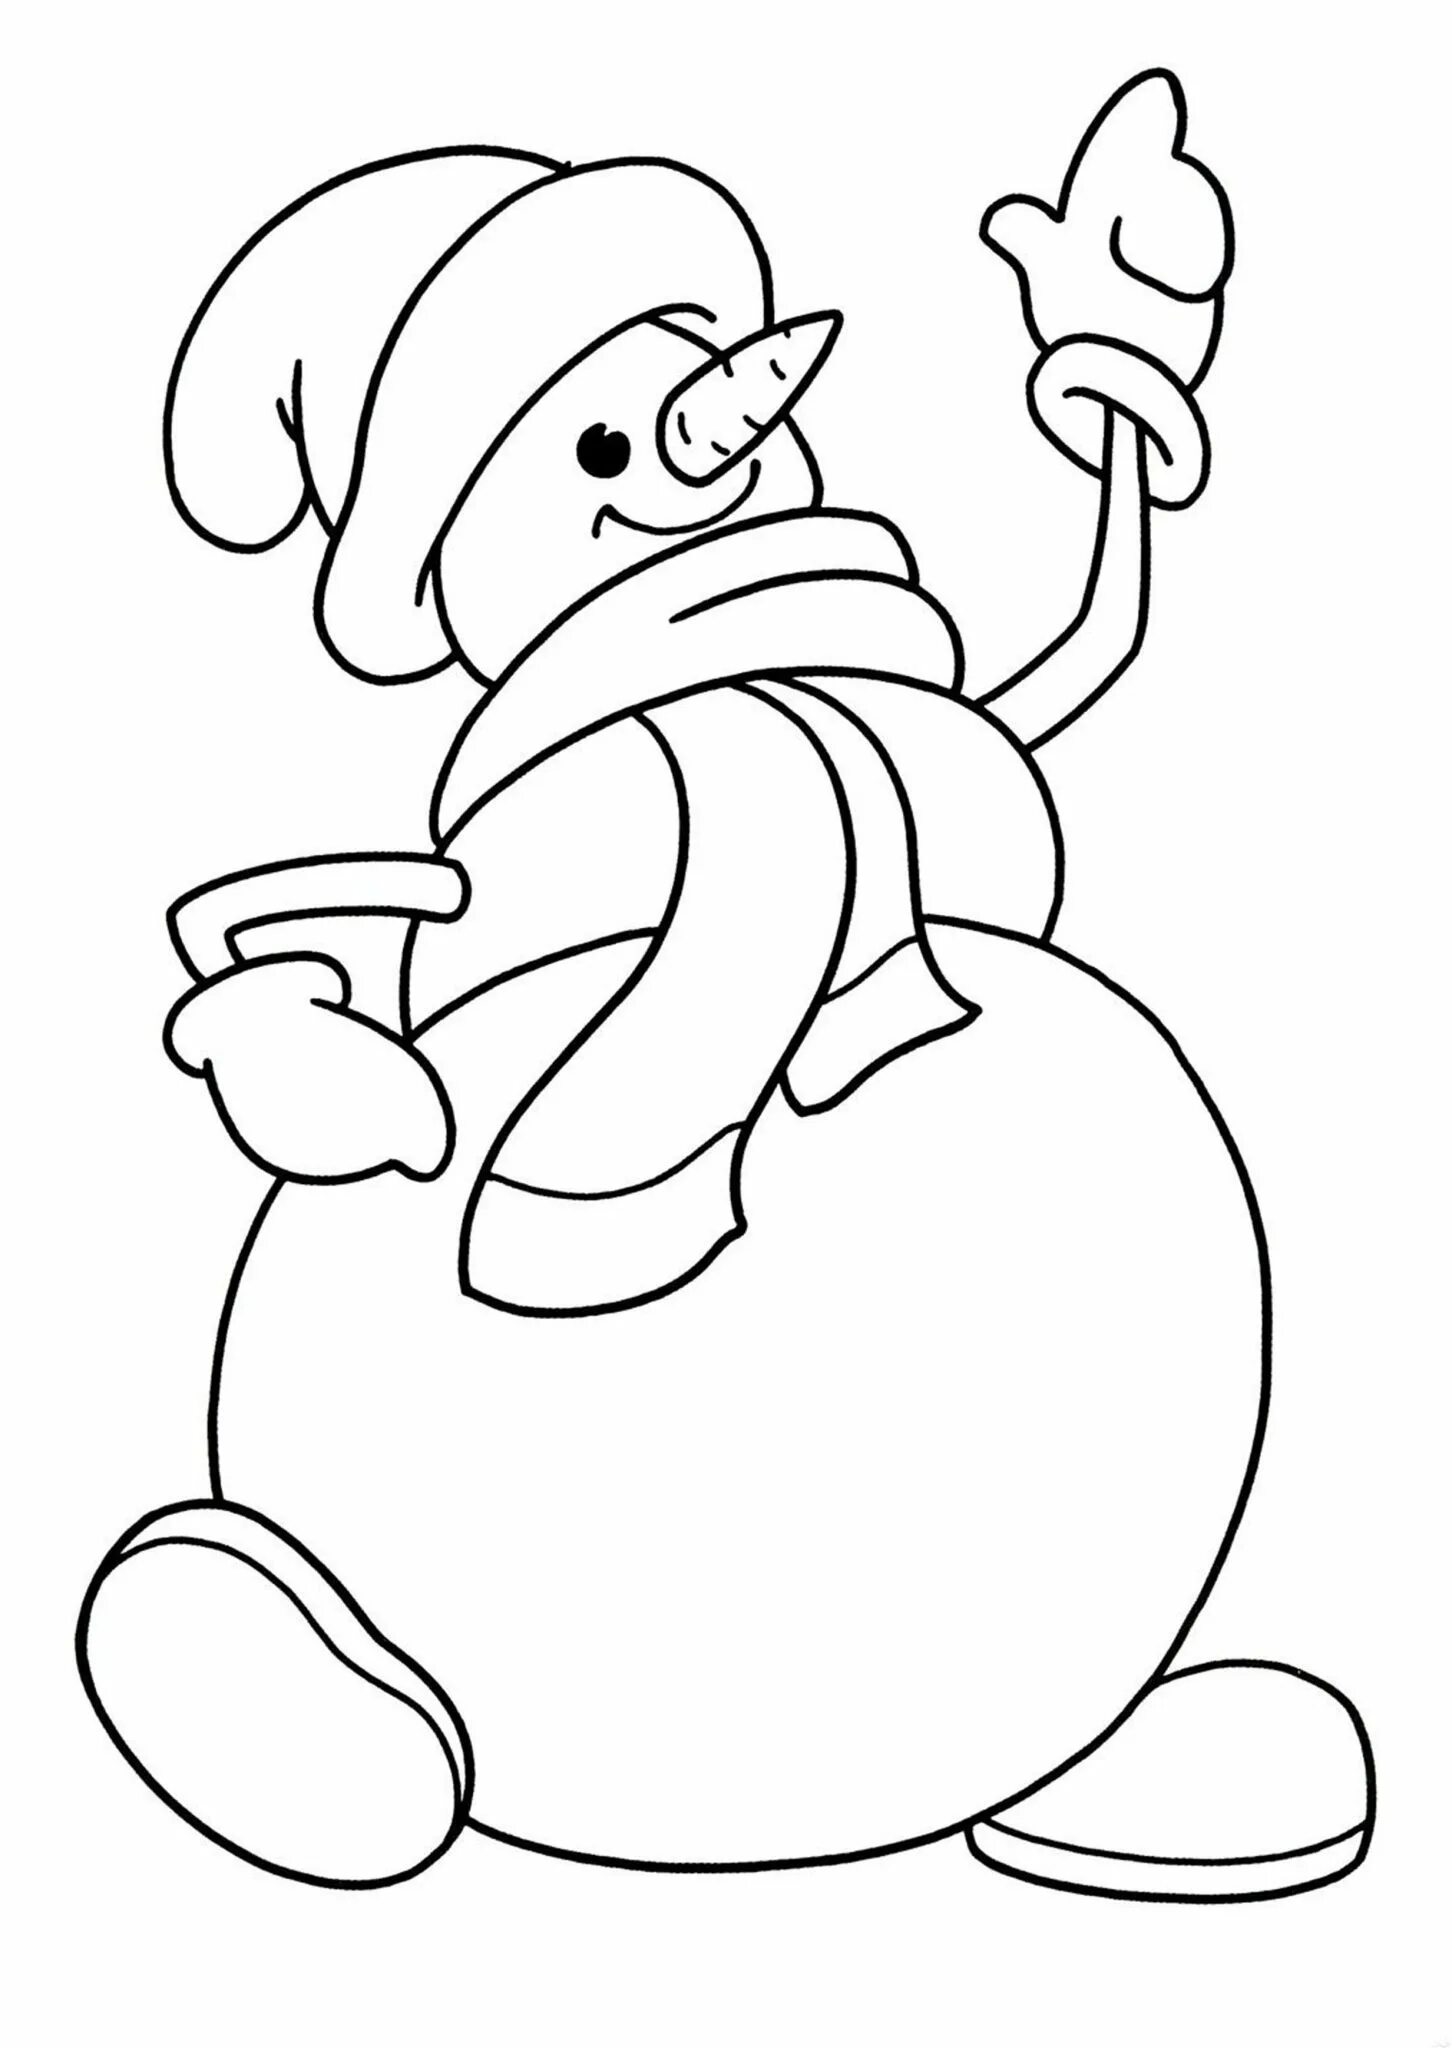 Witty Christmas snowman coloring page